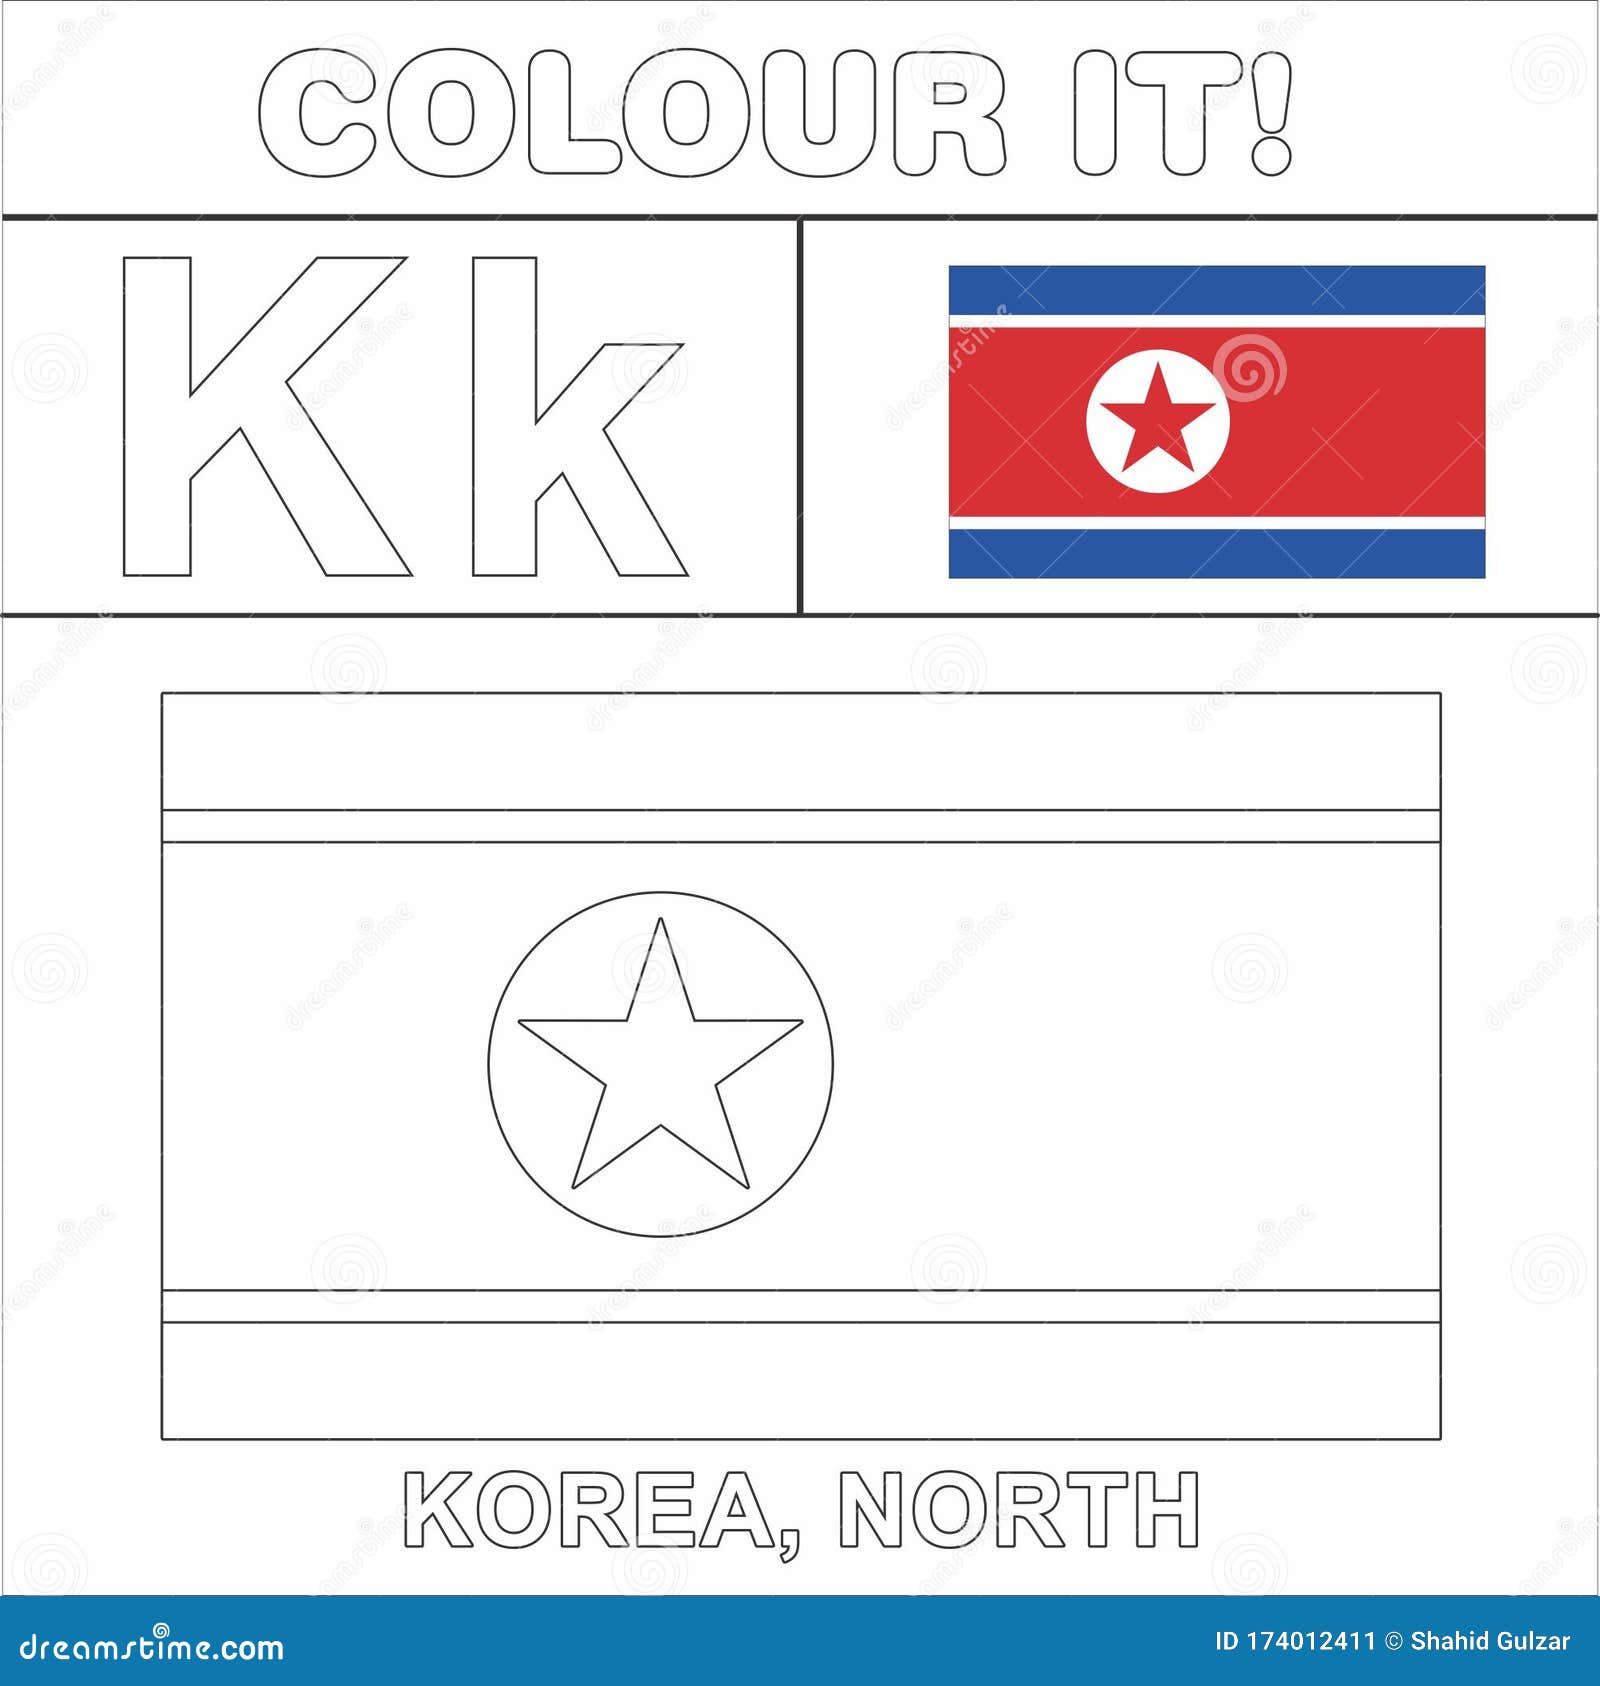 Colour it kids colouring page country starting from english letter k korea north how to color flag stock illustration